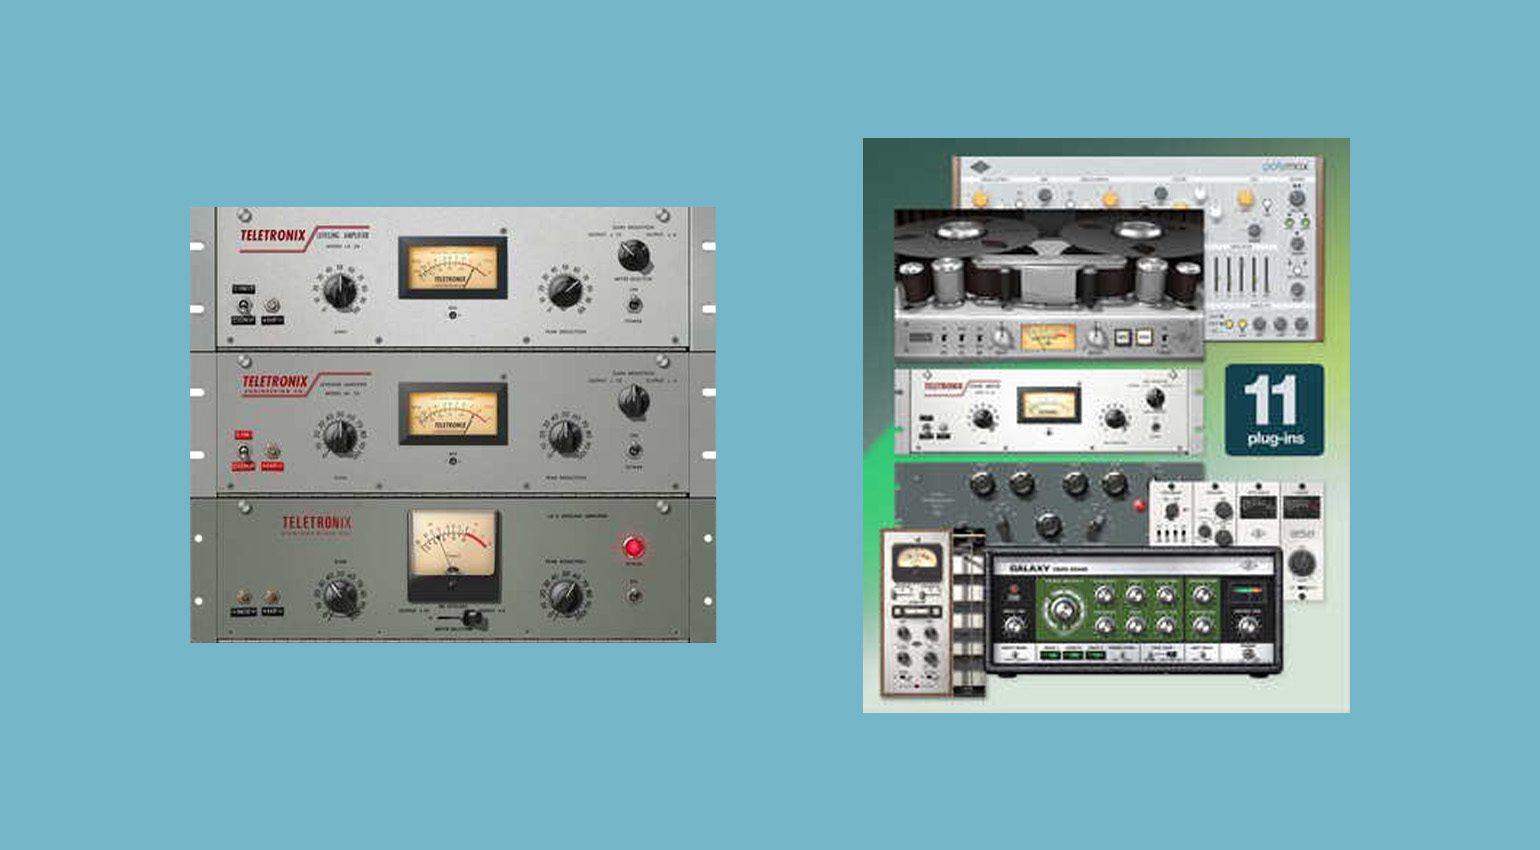 UAD crossgrade options from FREE LA-2A plugin